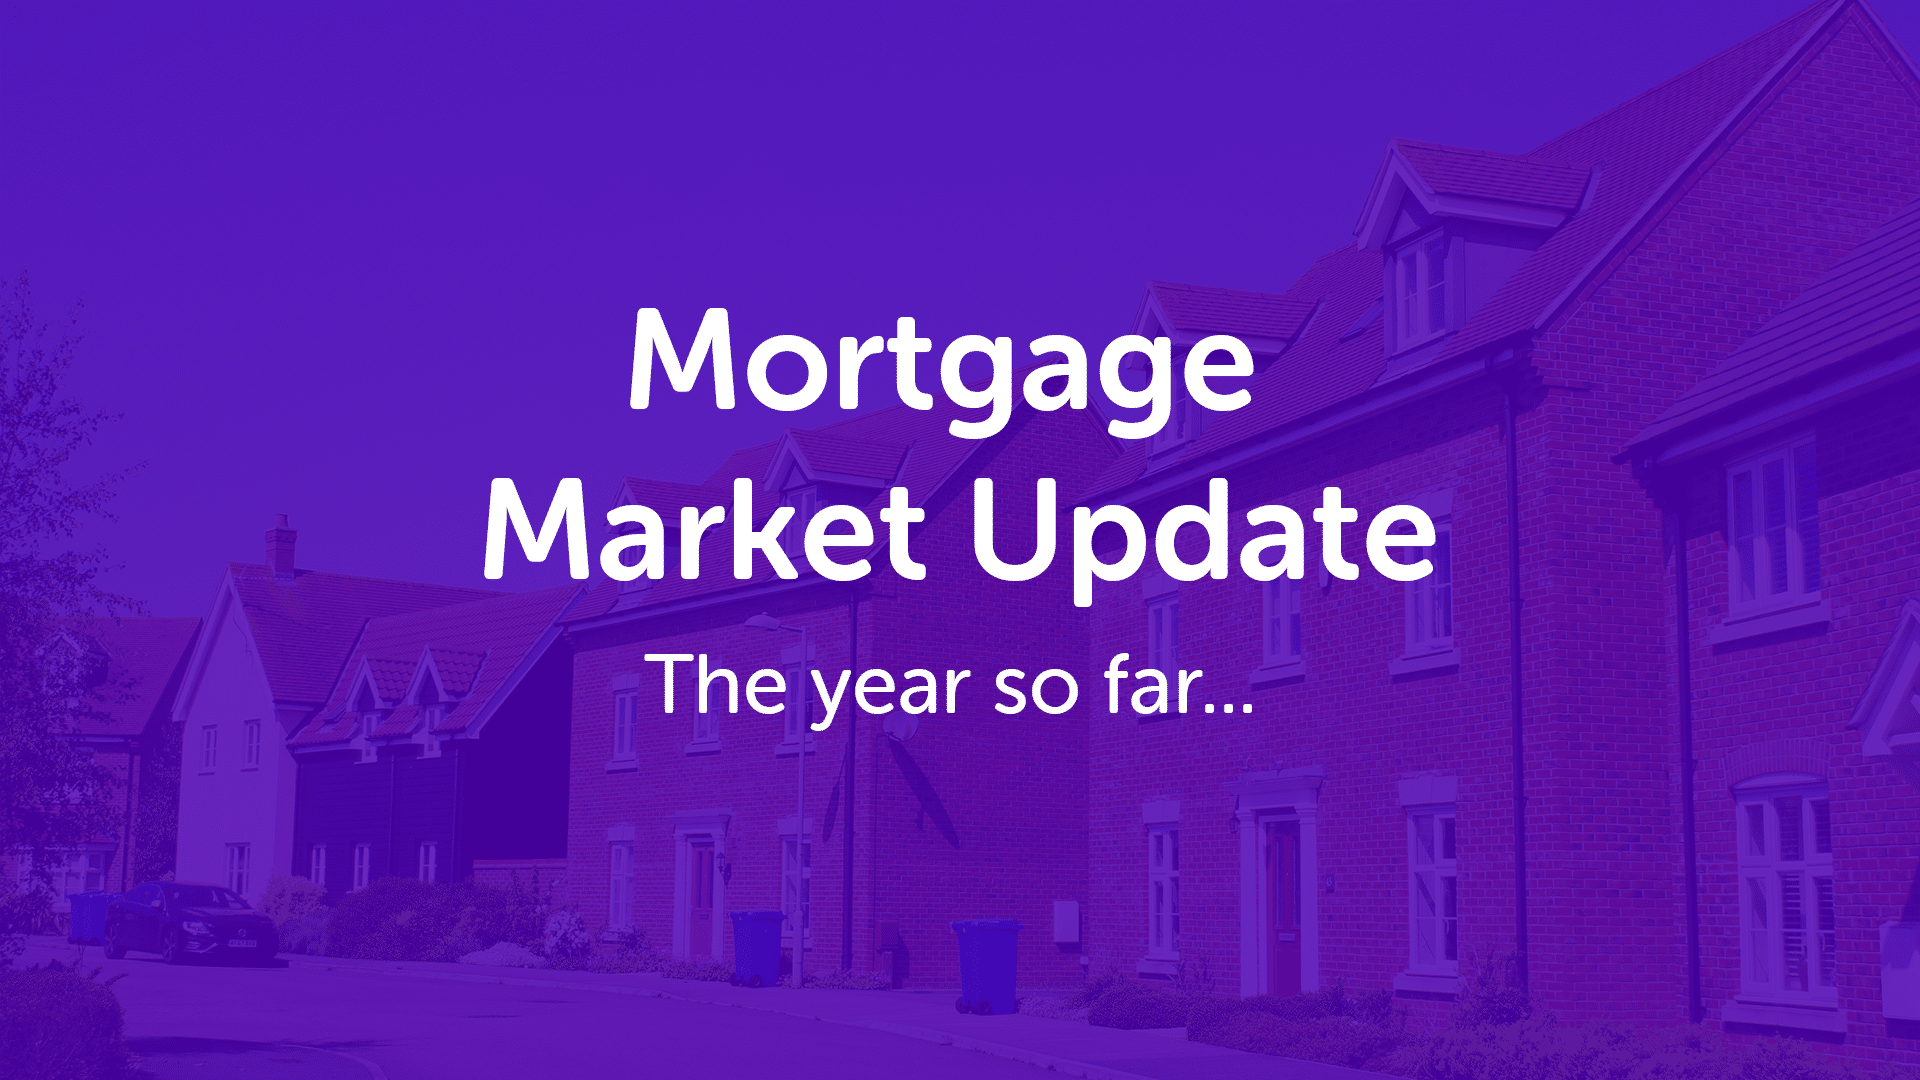 Mortgage Market Update - The Year So Far